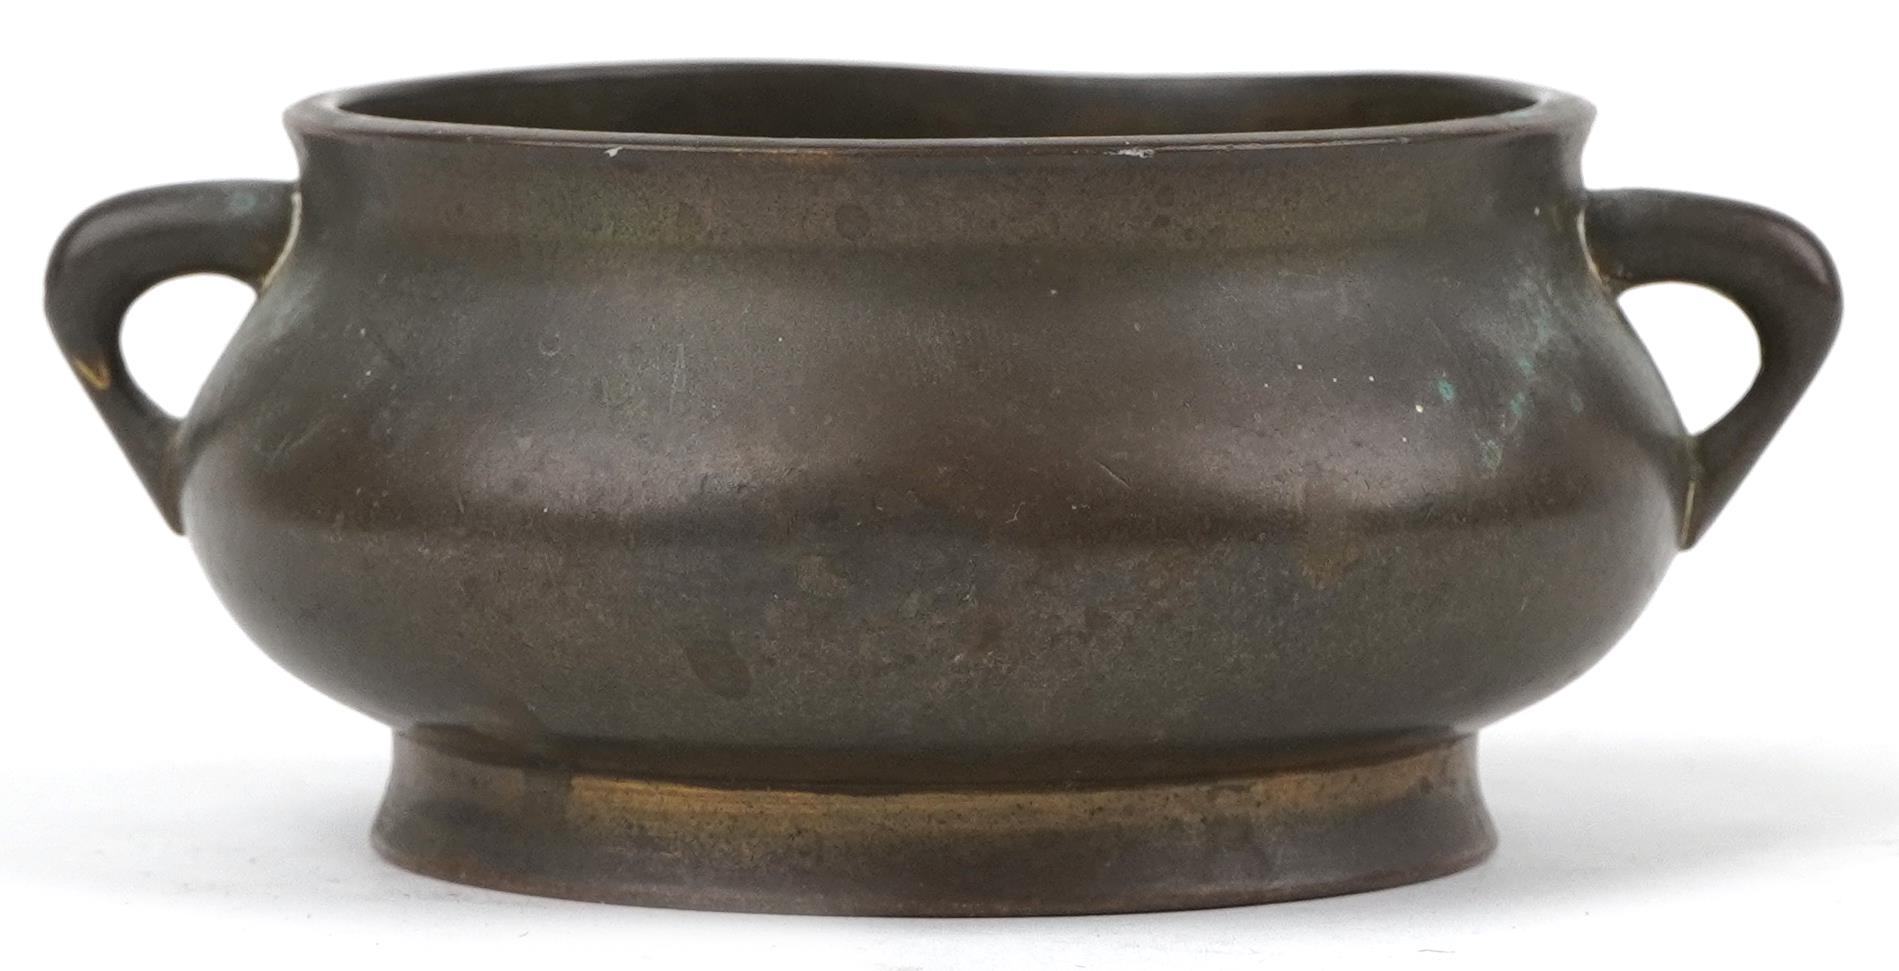 Chinese patinated bronze censer with twin handles, six figure character marks to the base, 12cm wide